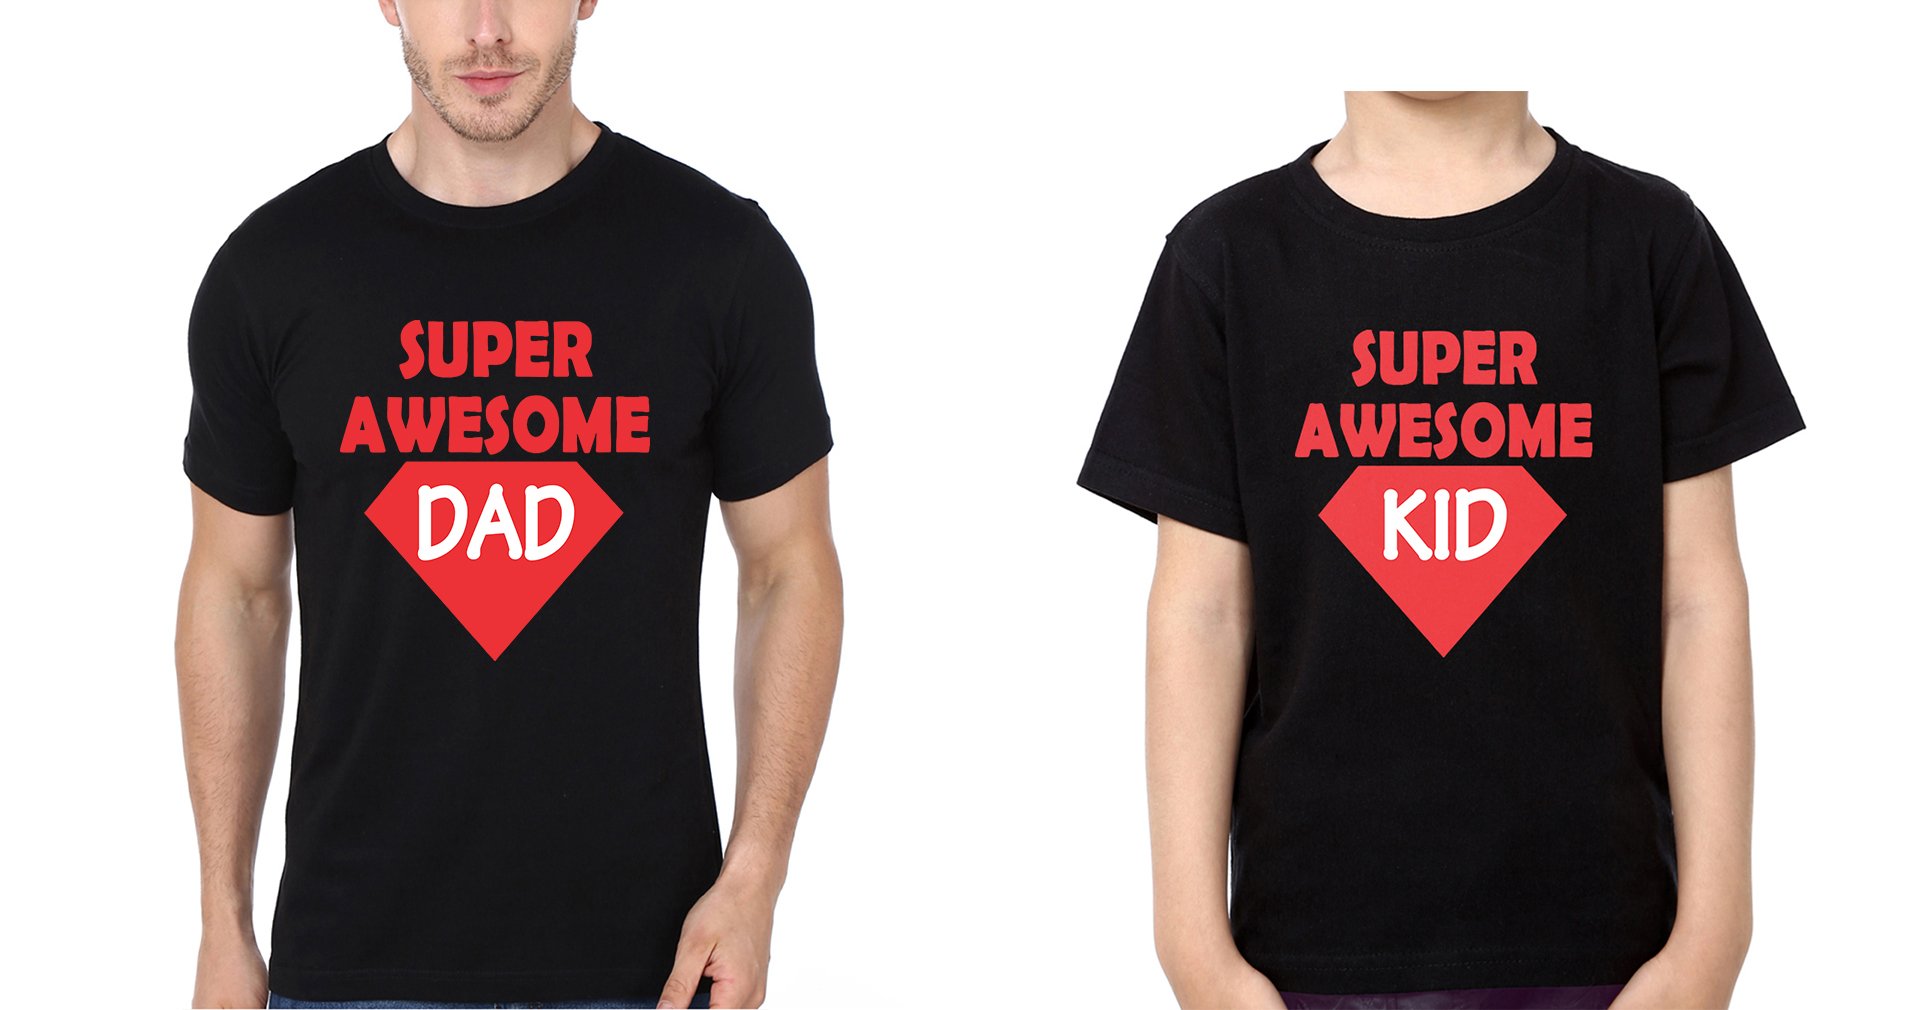 Super Awesome Kid Super Awesome Dad Father and Son Matching T-Shirt- FunkyTeesClub